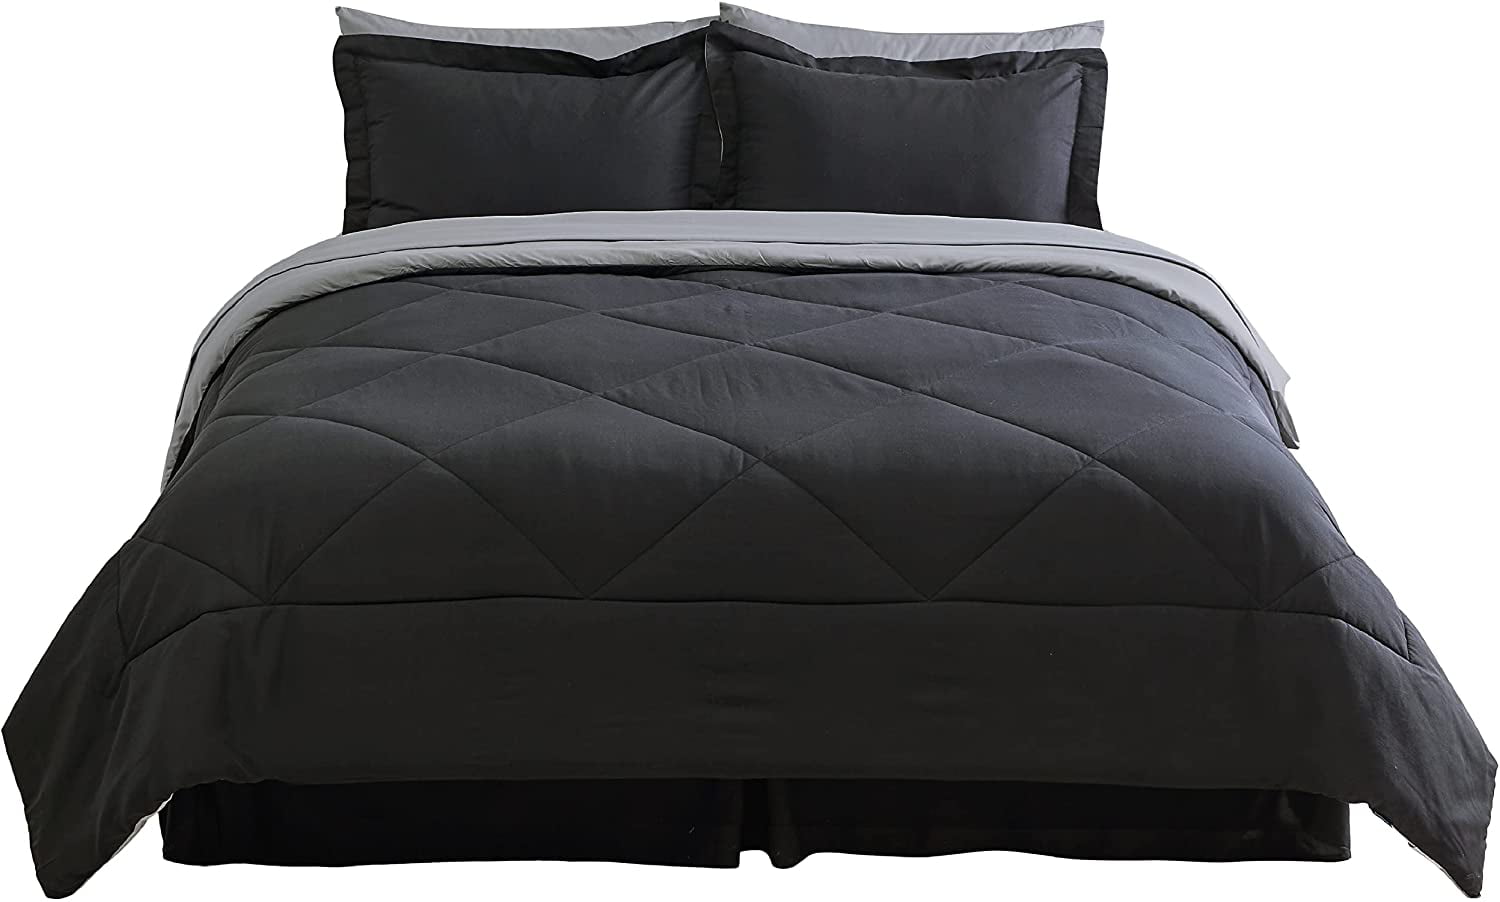 Bedsure Black Comforter Set Queen - 7 Pieces Reversible Bed in a Bag with Comforters, Sheets, Pillowcases & Shams